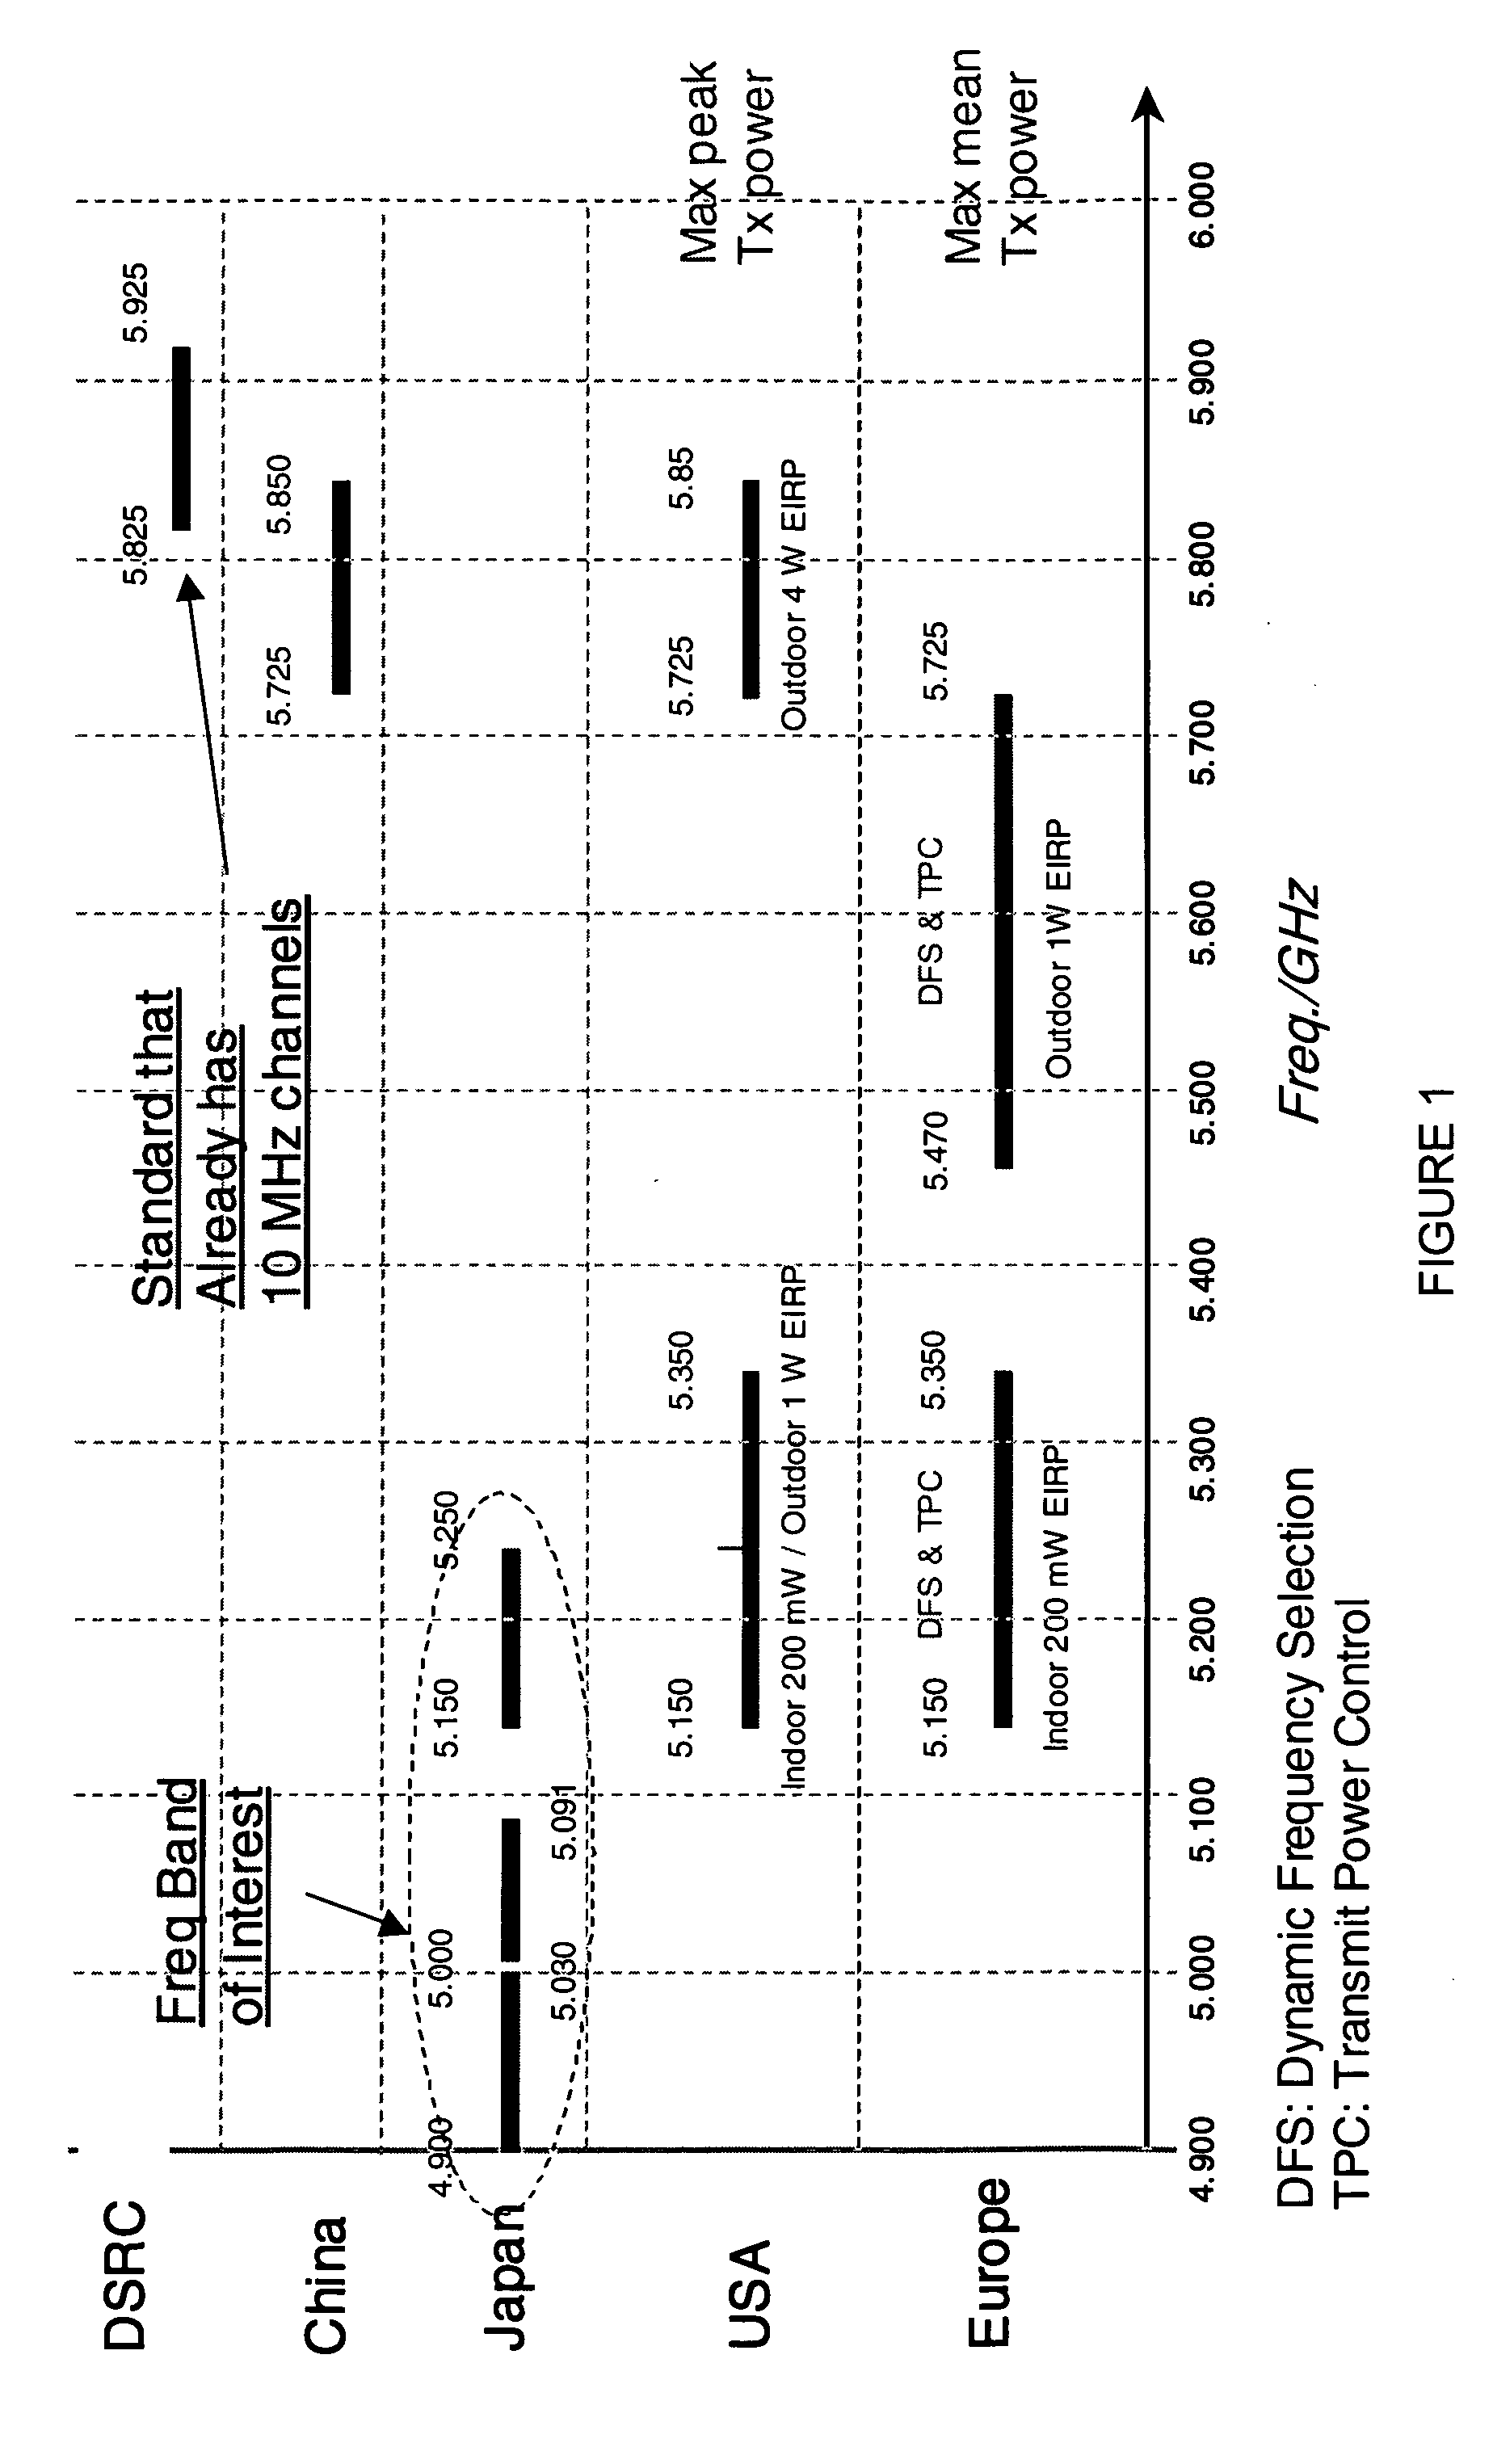 Method and system for high data rate multi-channel WLAN architecture